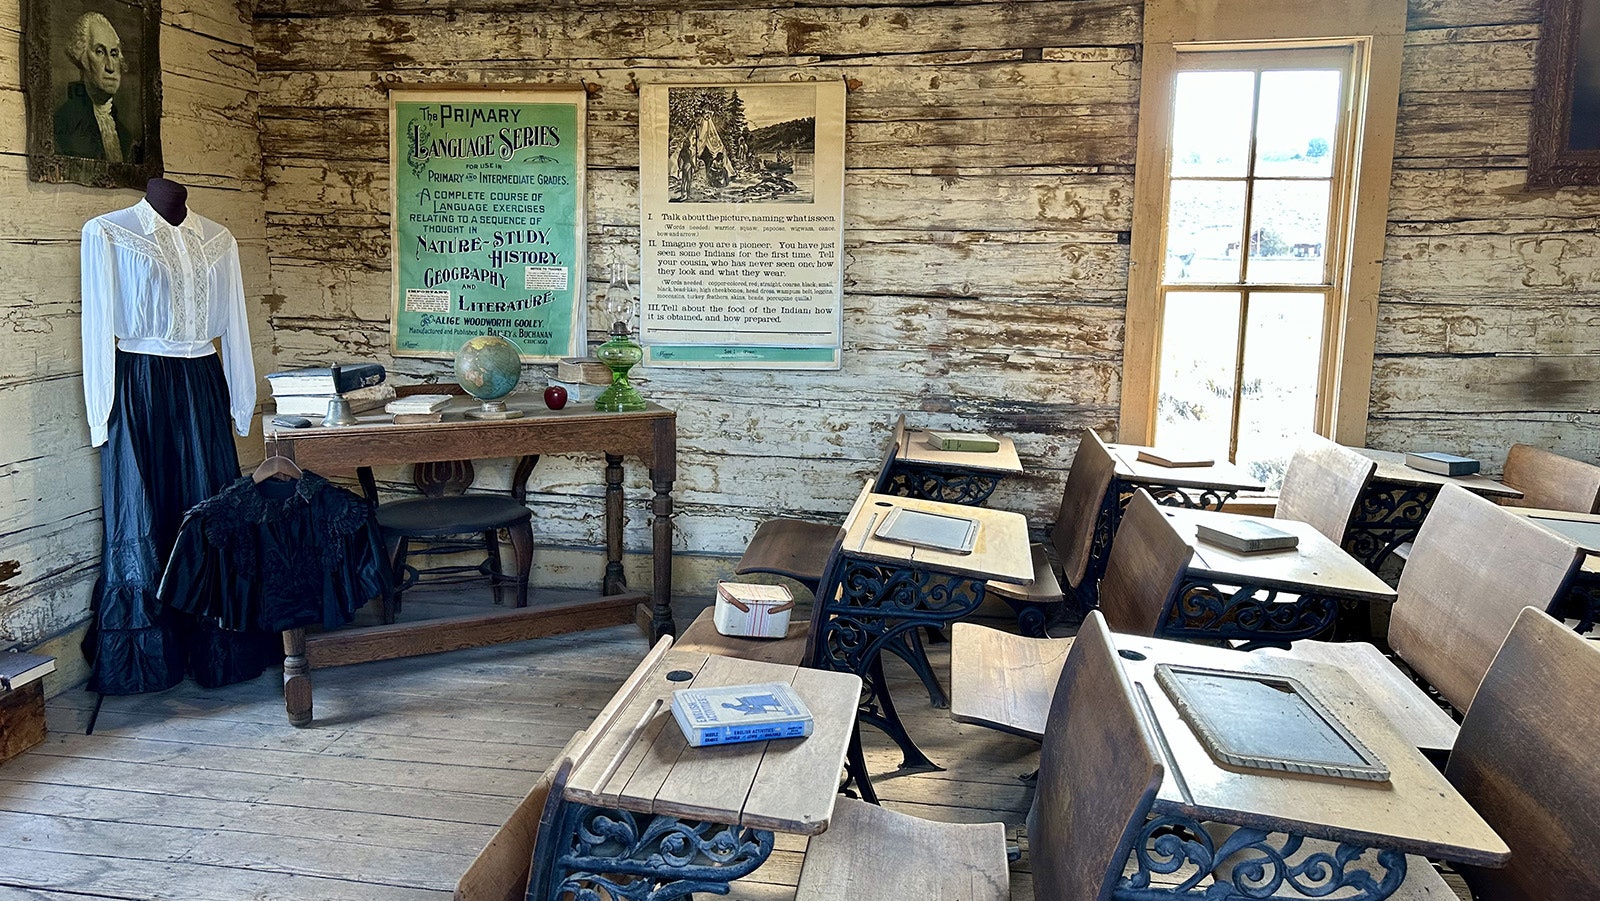 The interior of the Coffin School at Old Trail Town, originally located in Meeteetse. The dress and blouse on display were a recent discovery in one of the many unopened chests scattered throughout the complex.